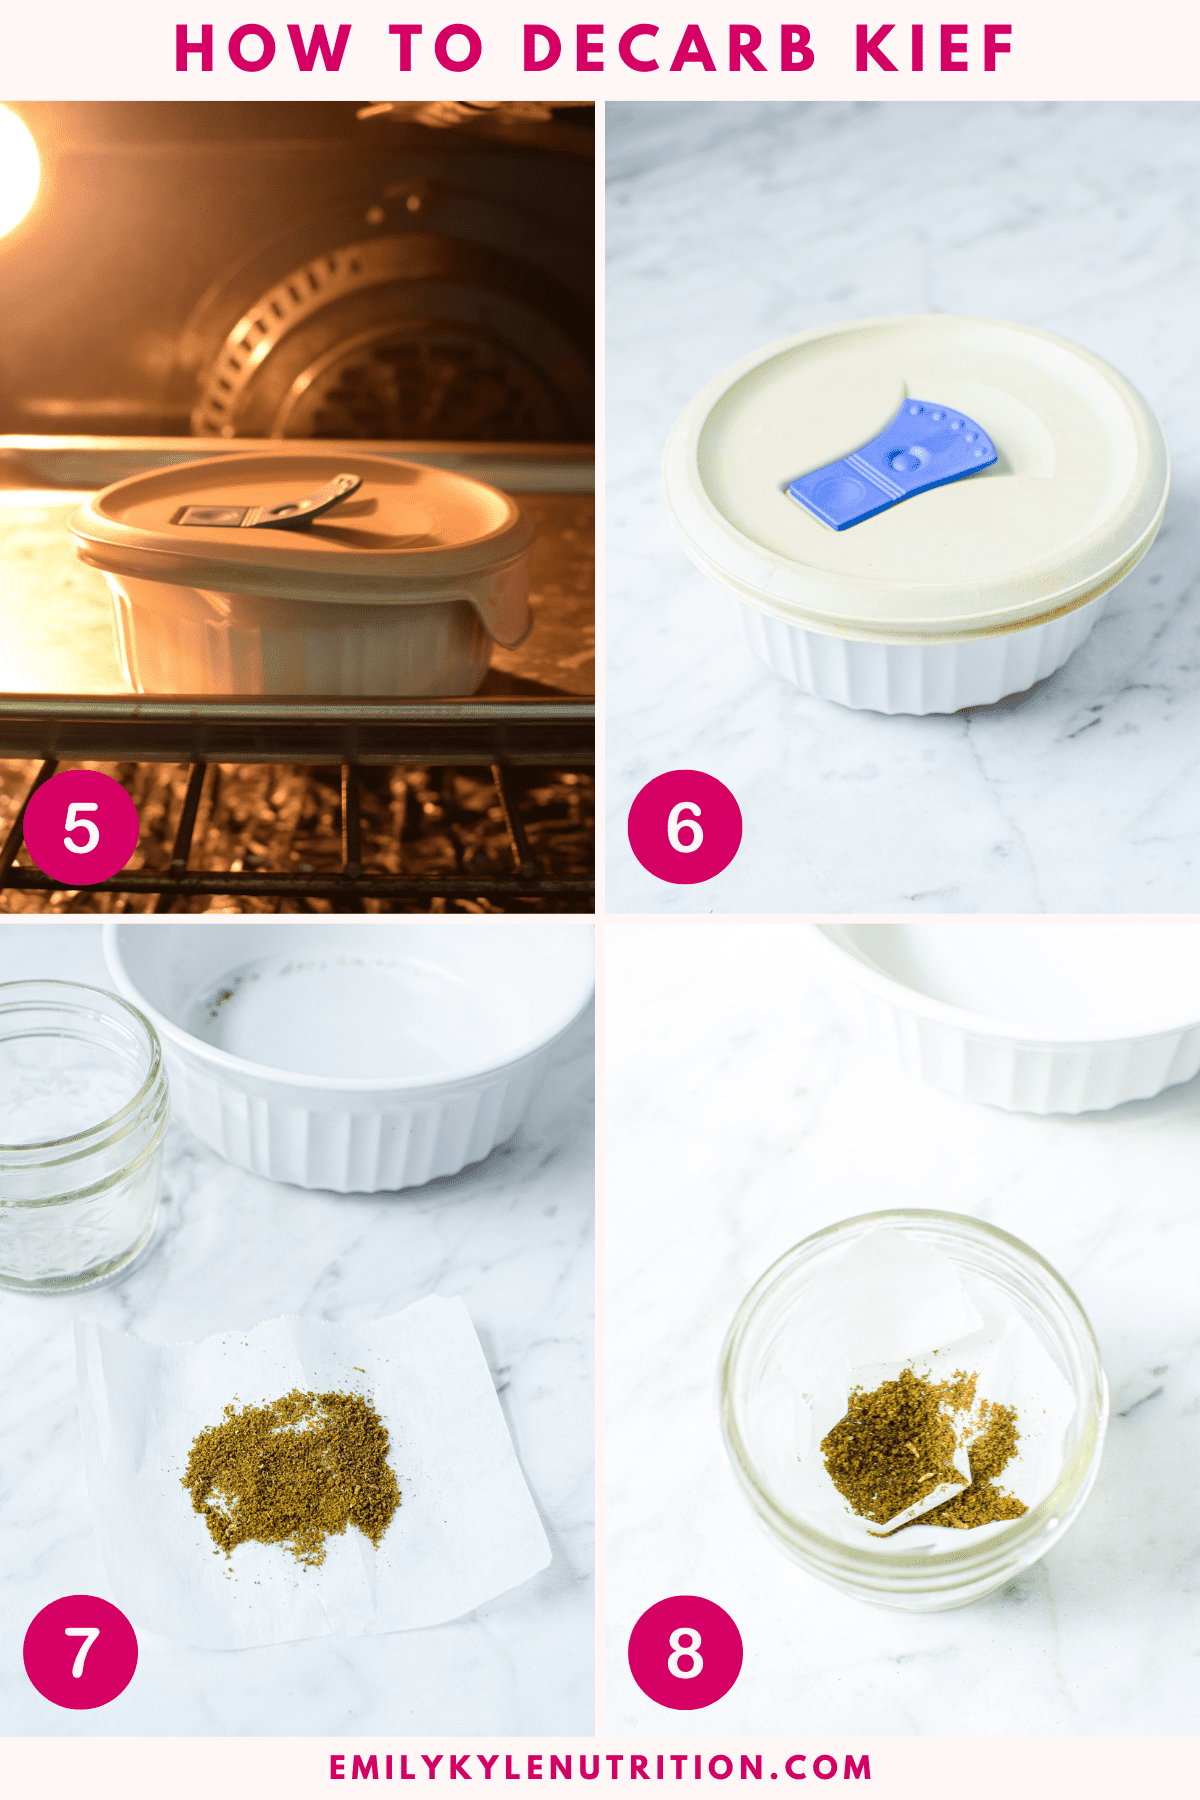 A four step image collage showing the steps needed to decarb kief.